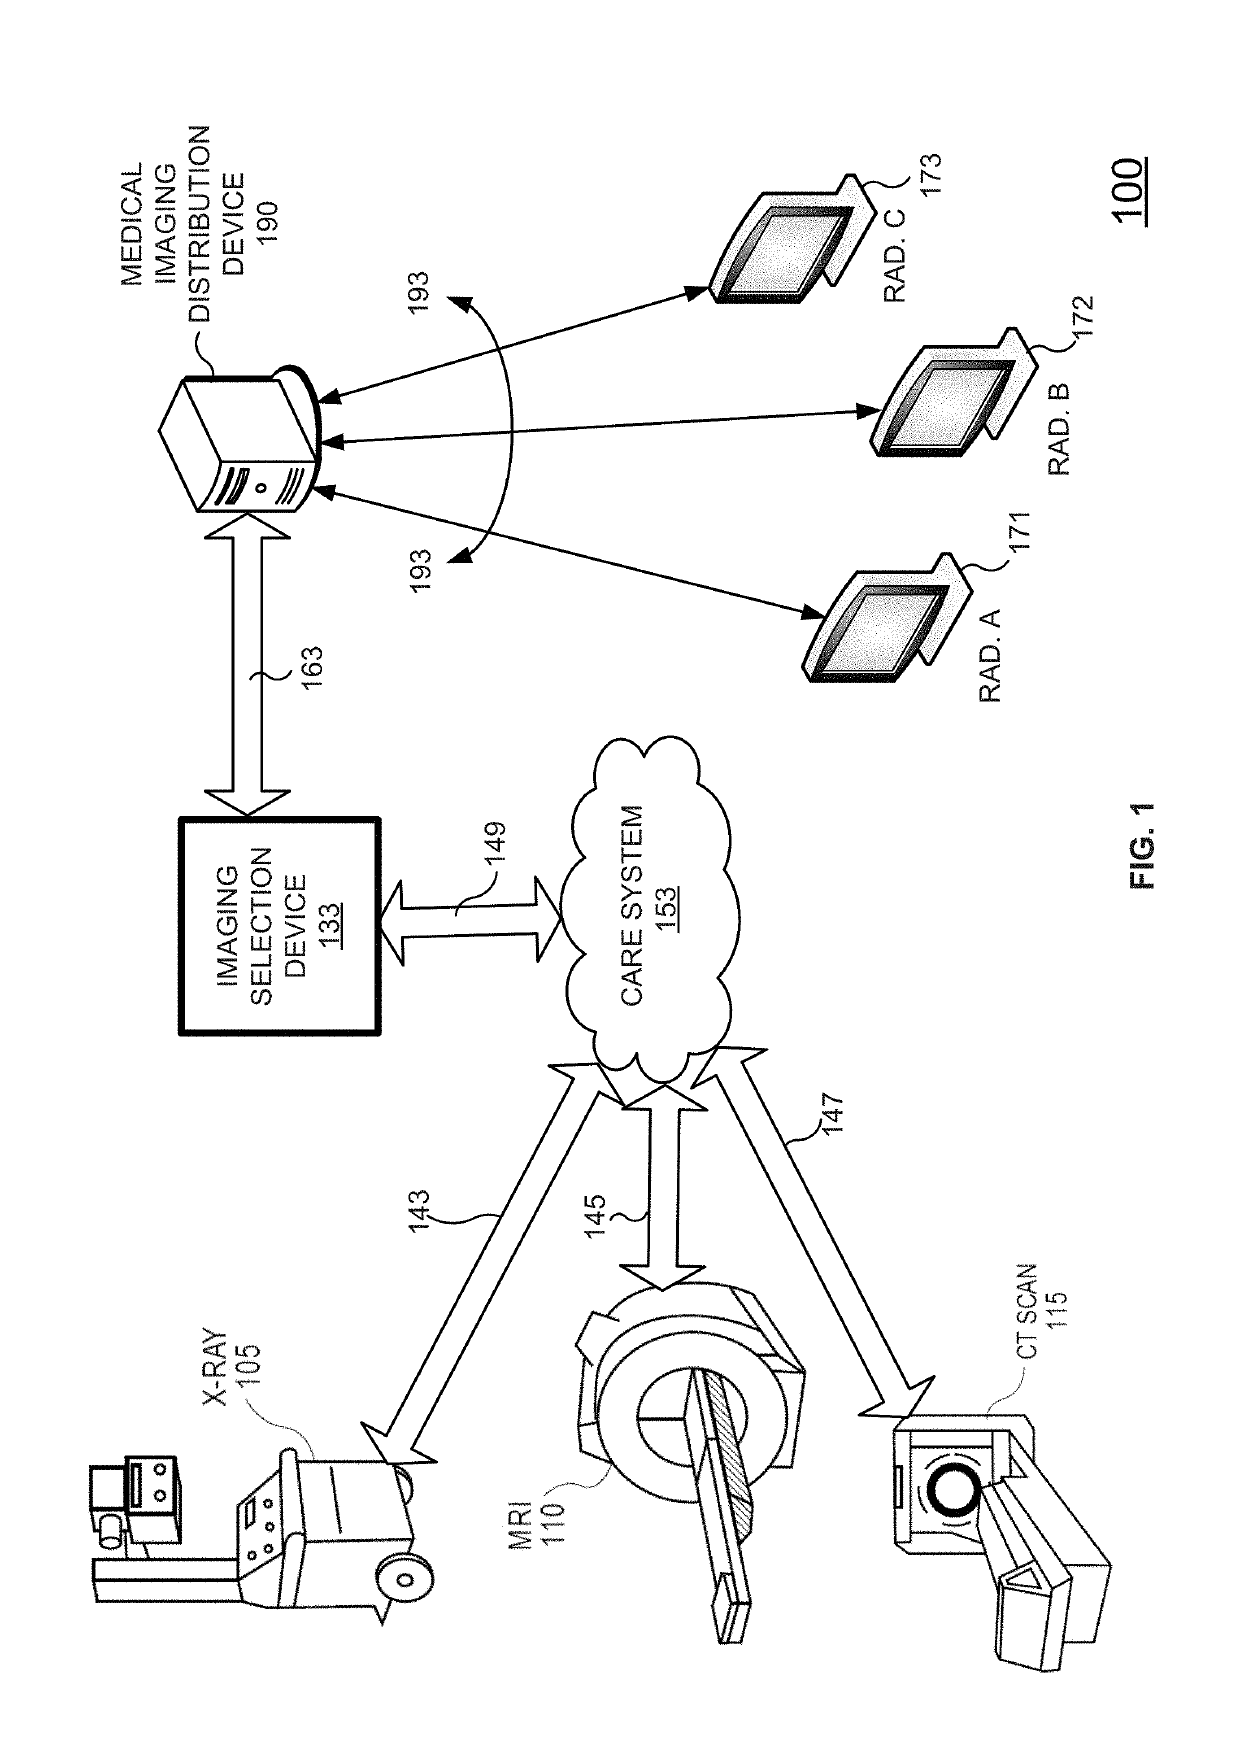 System and method for medical imaging report input